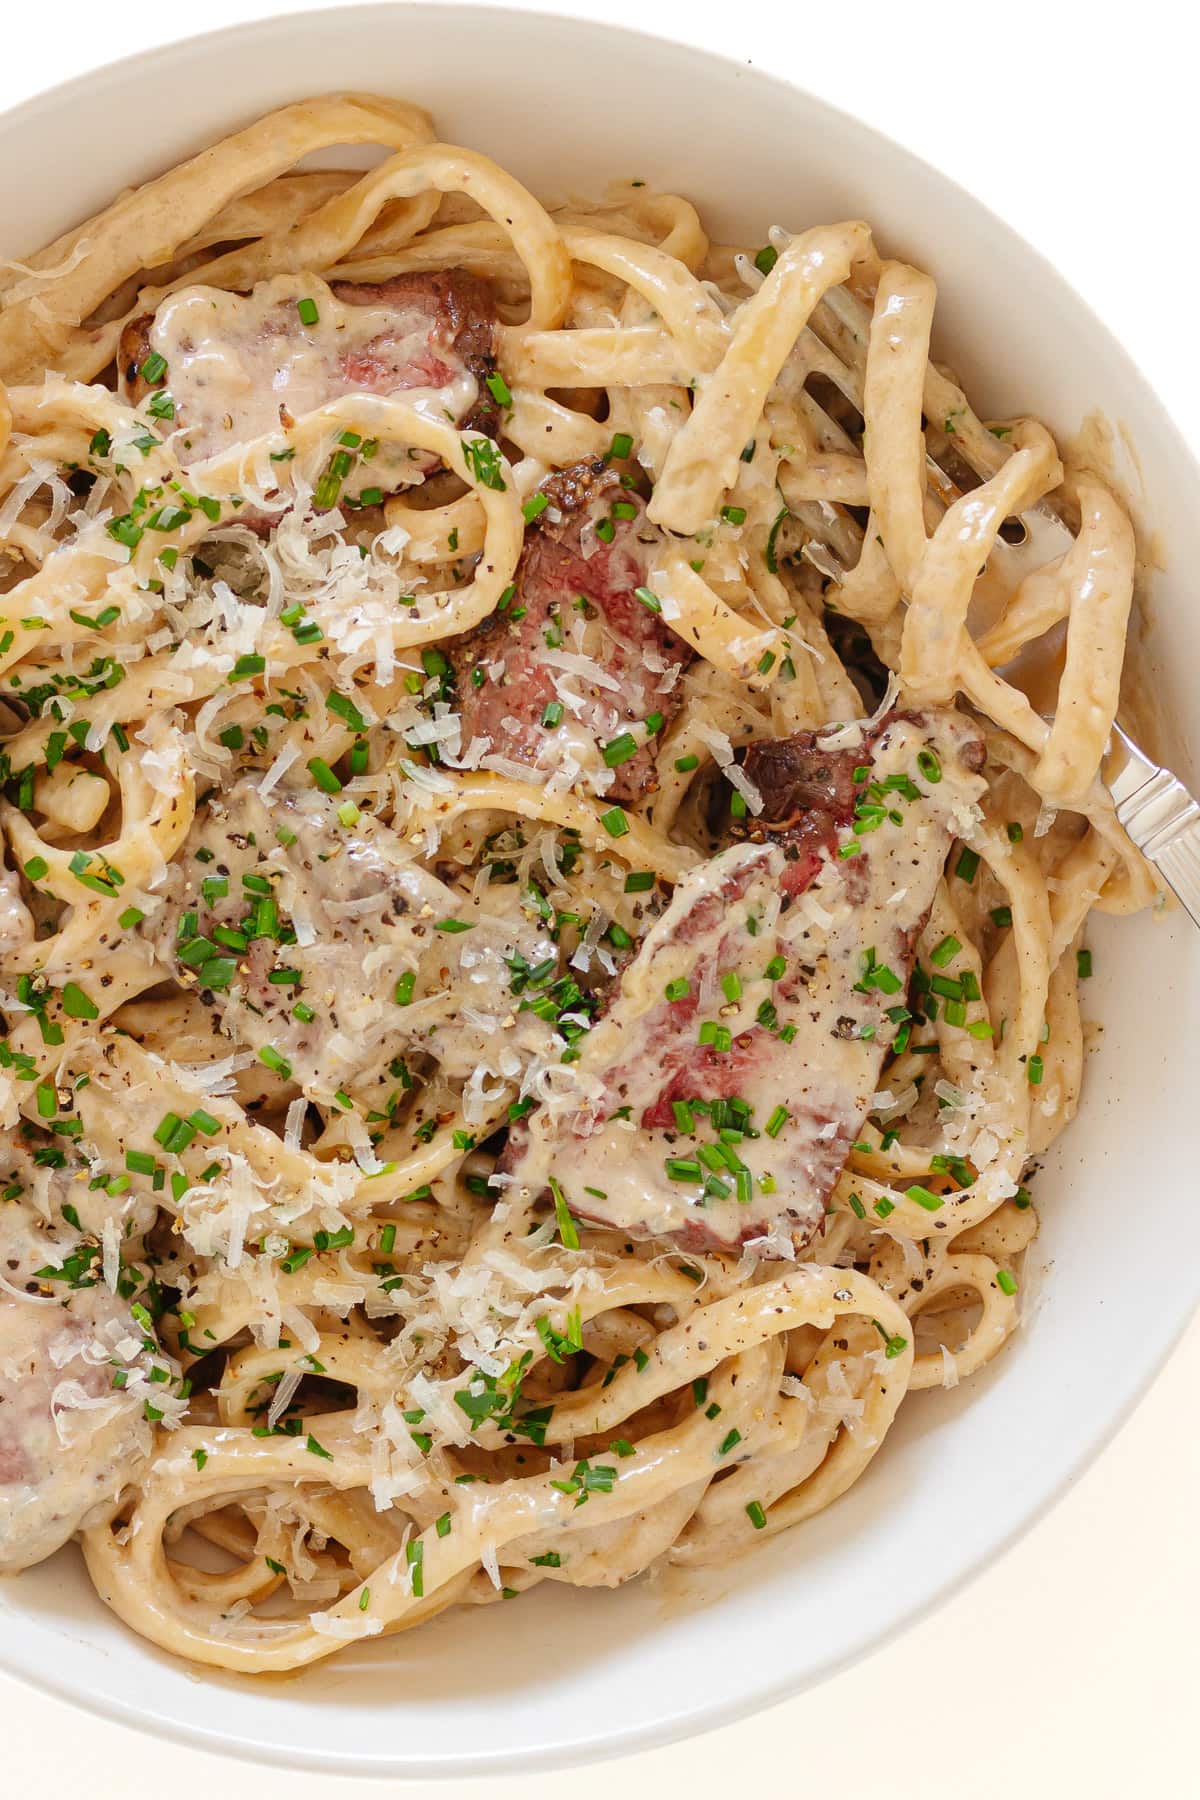 Gorgonzola pasta with steak on a white plate with fork.